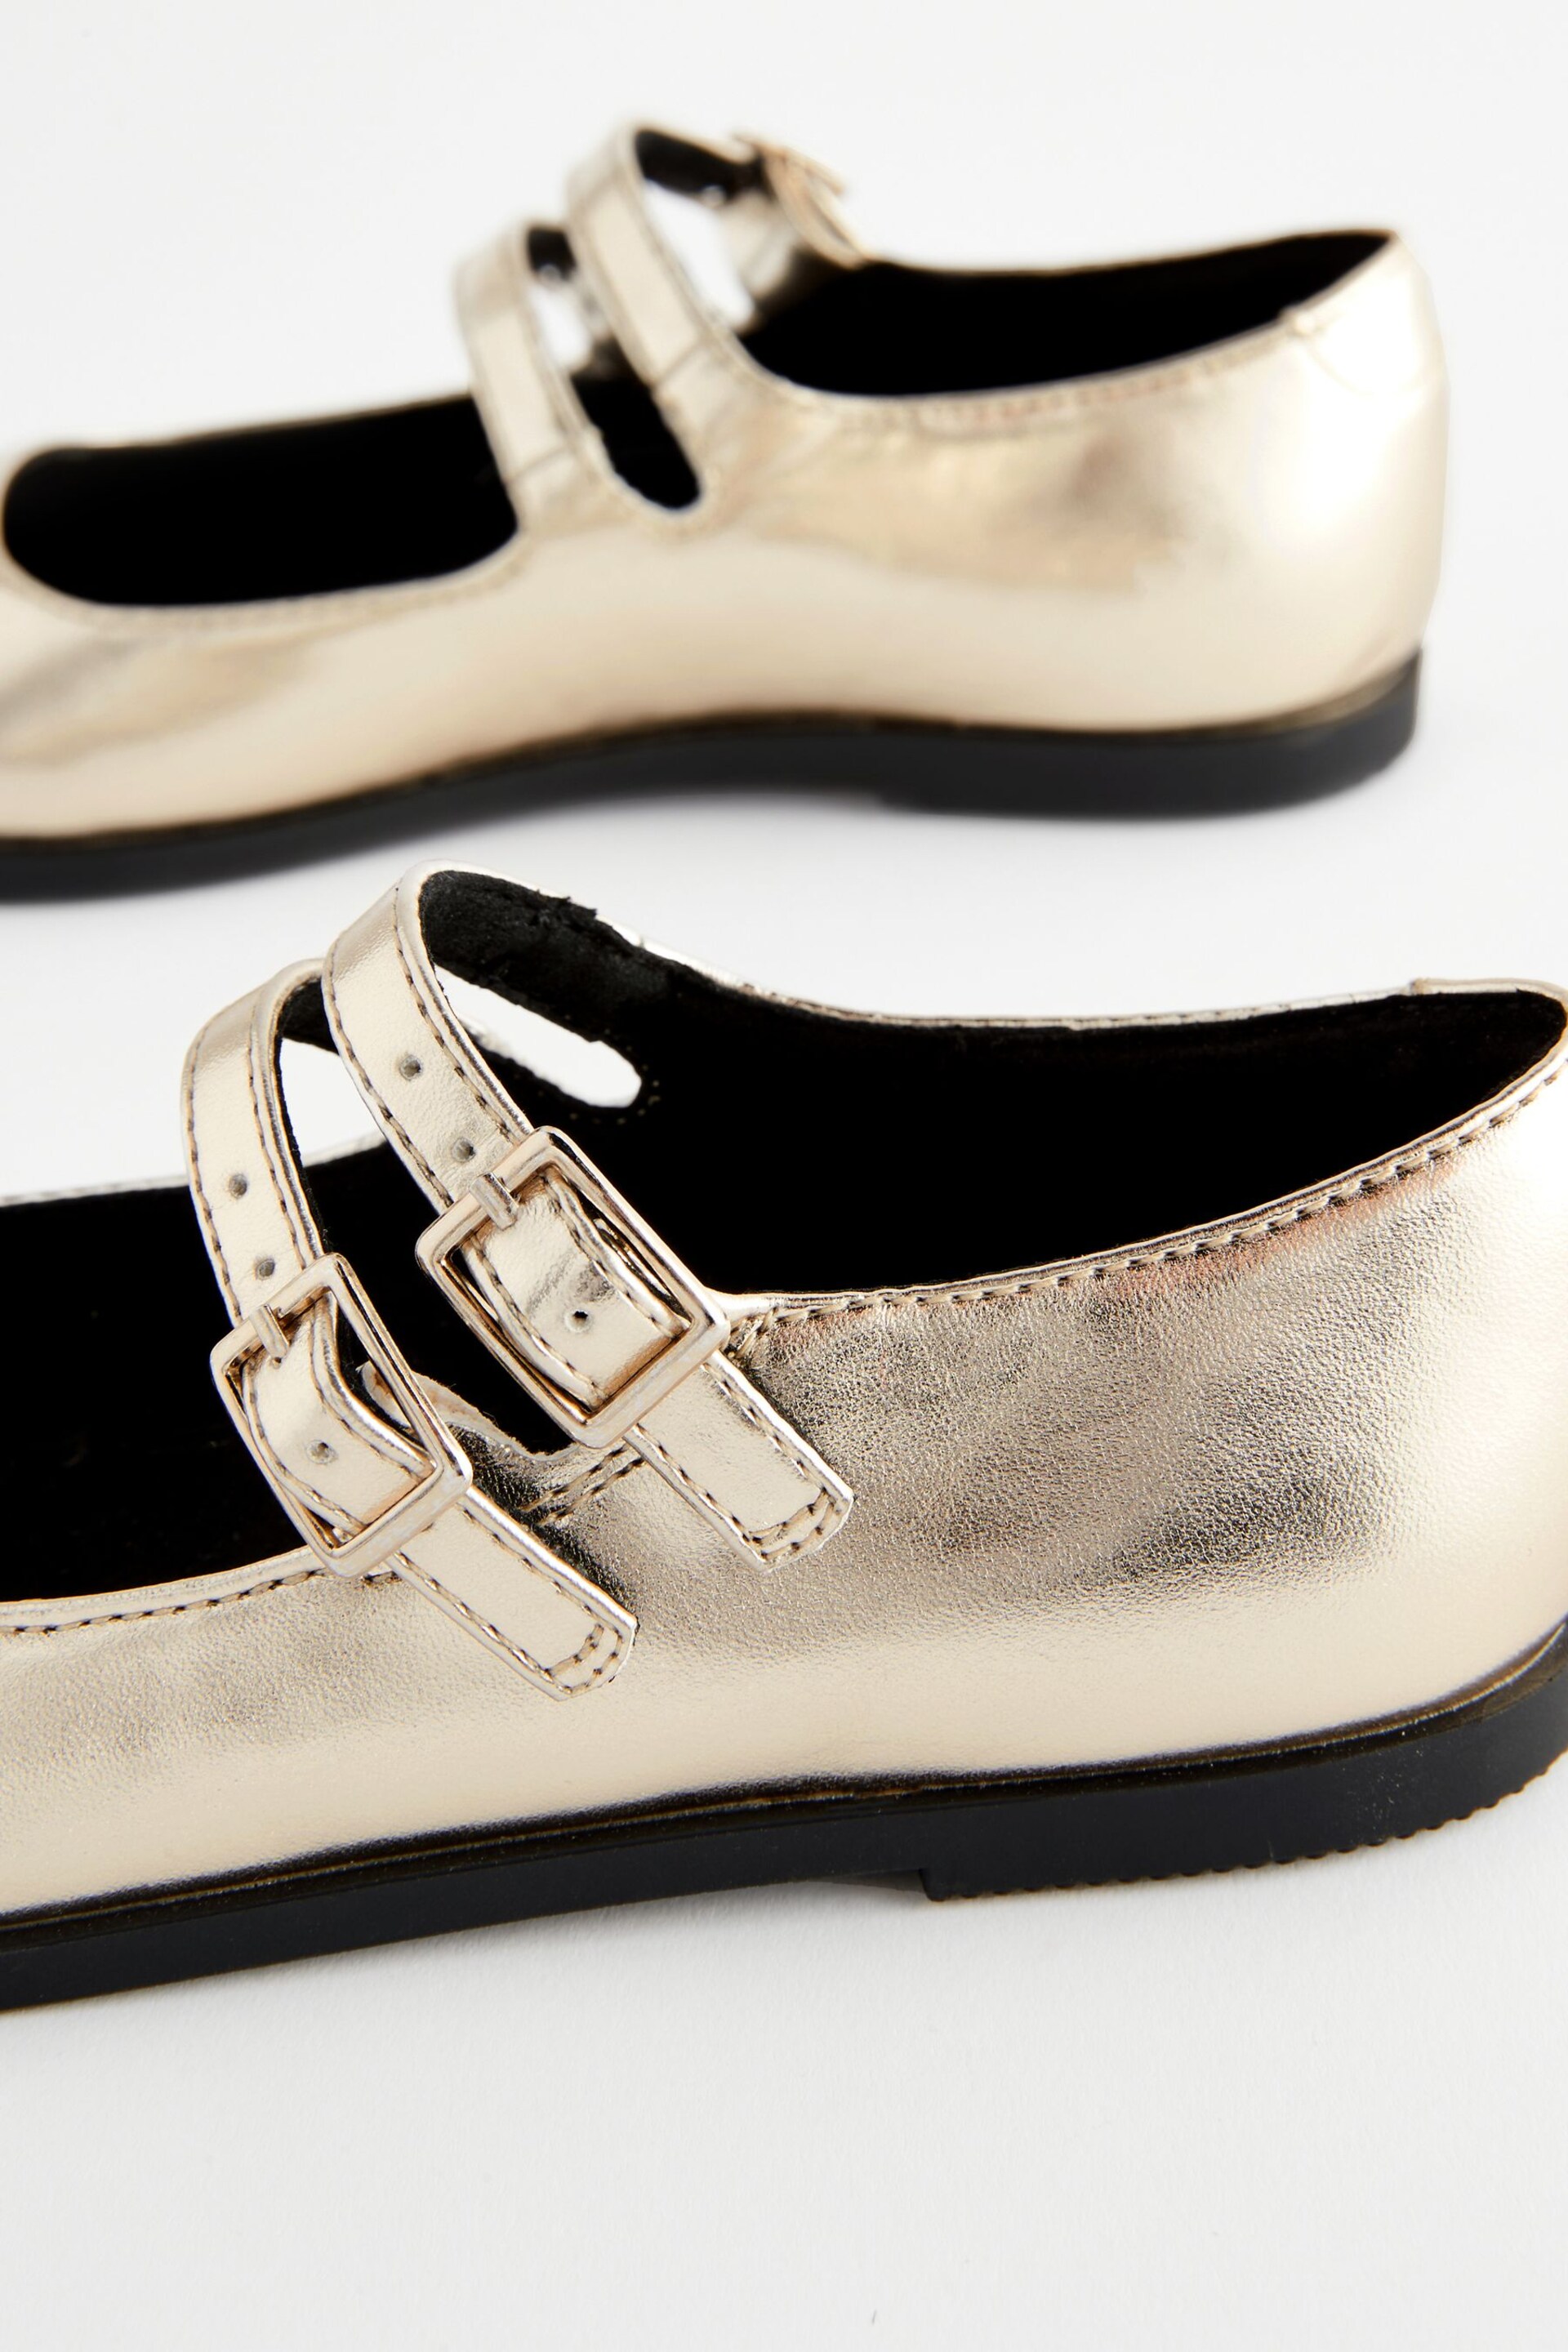 Gold Metallic Double Strap Mary Jane Shoes - Image 6 of 6